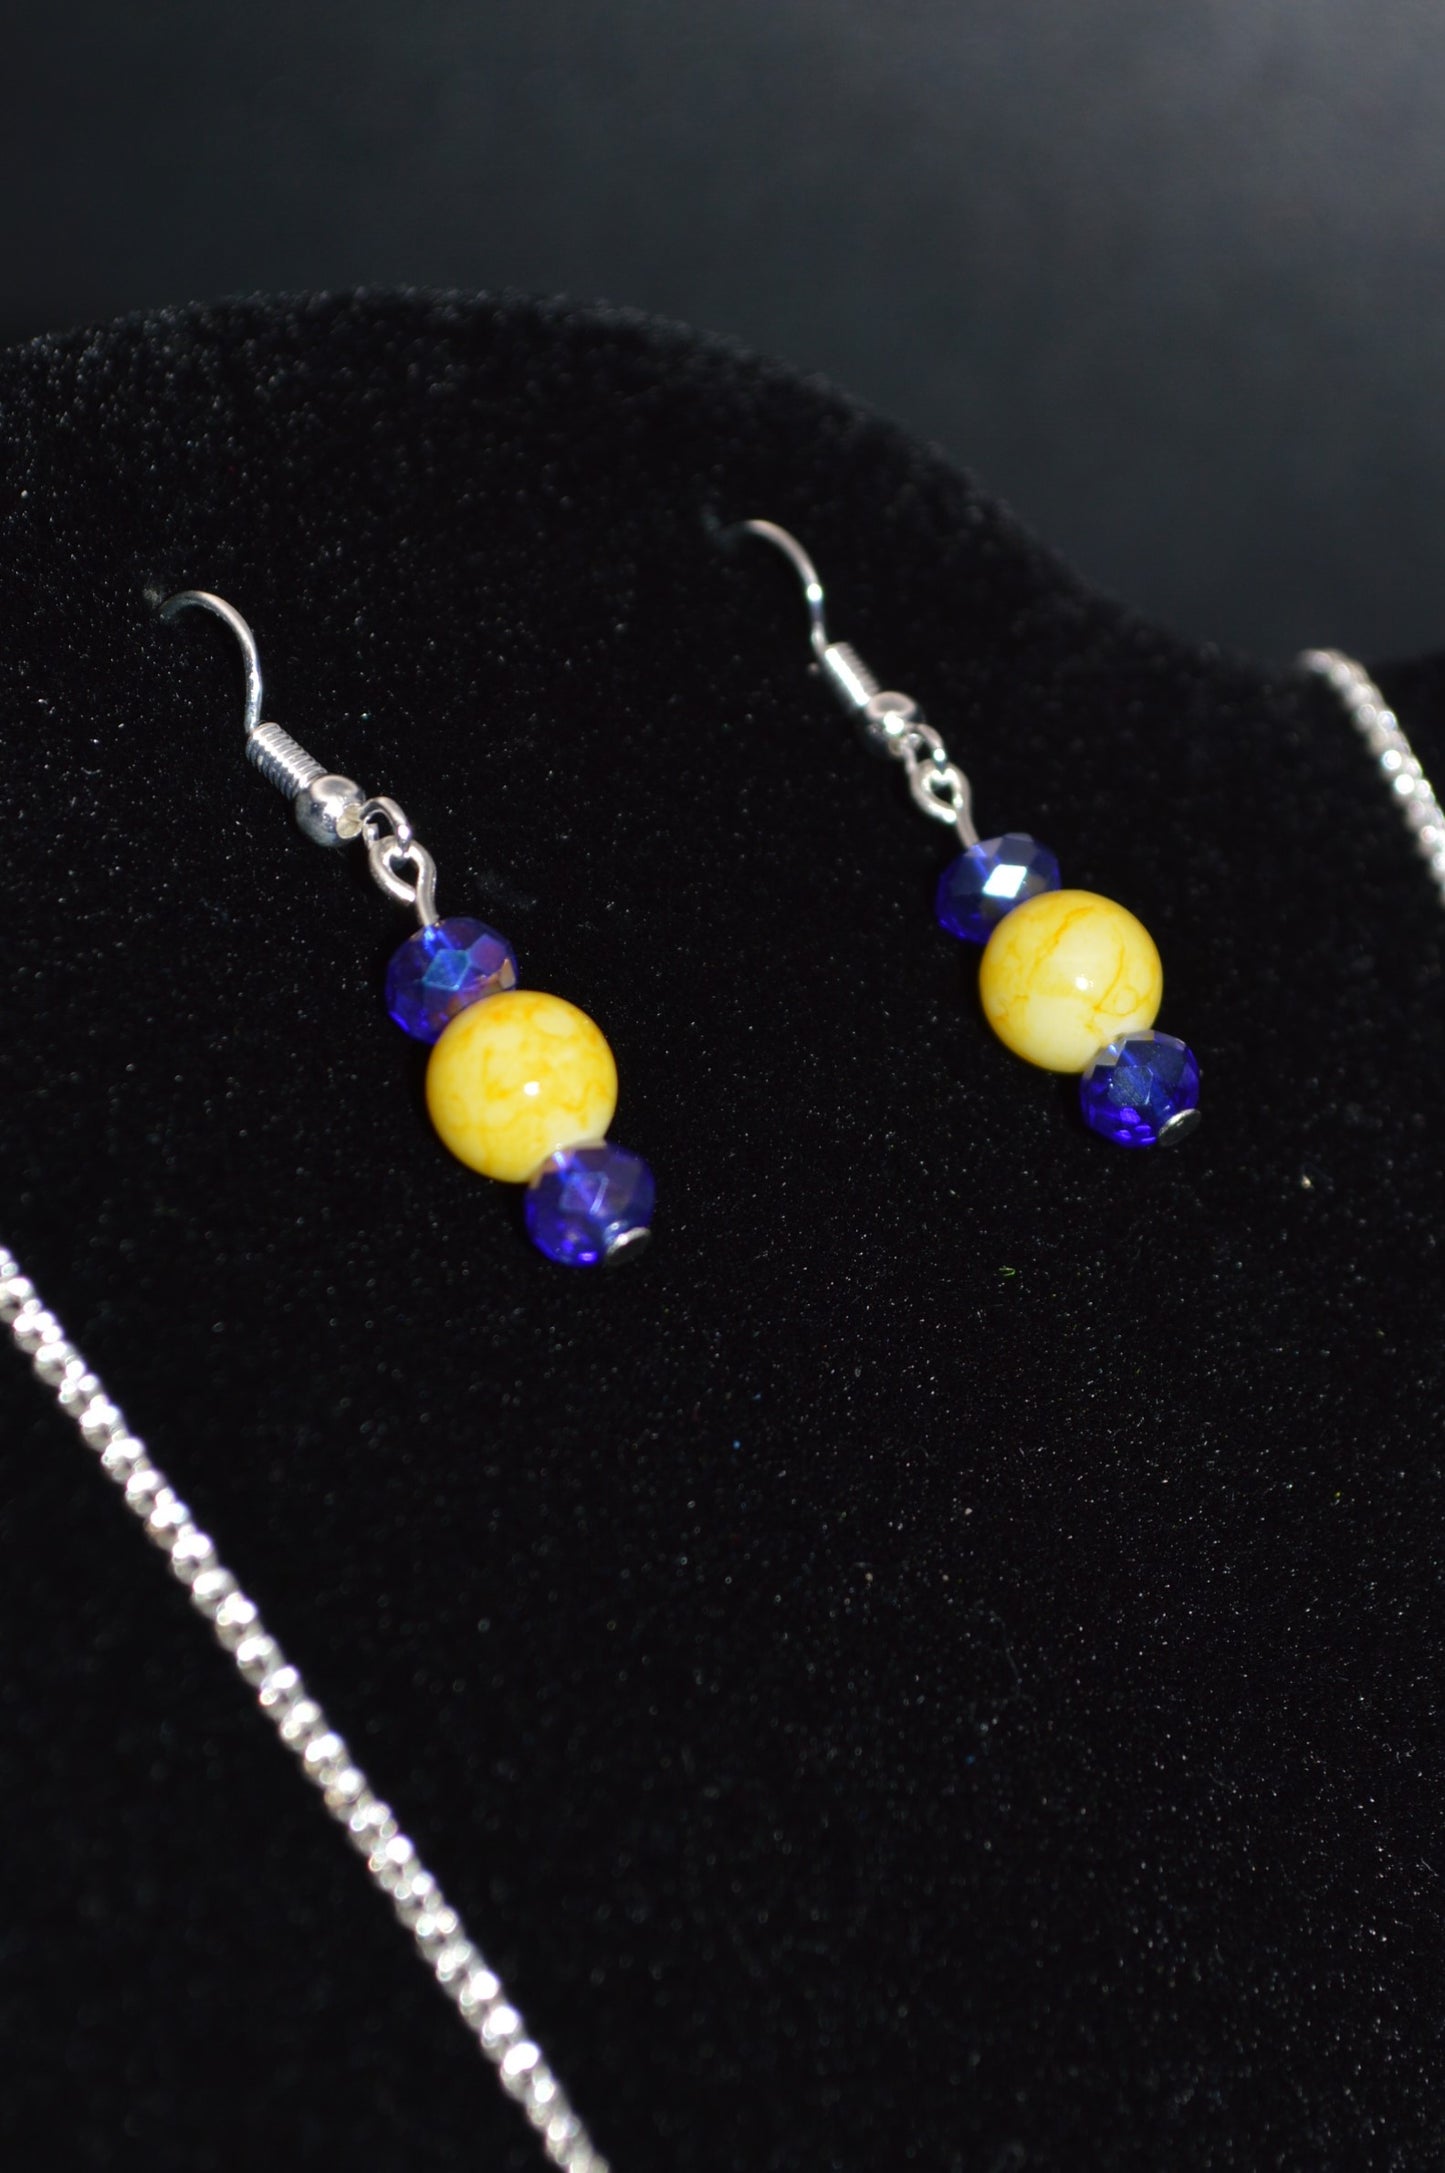 Yellow Marbled Glass and Blue Crystal Necklace and Earring Set